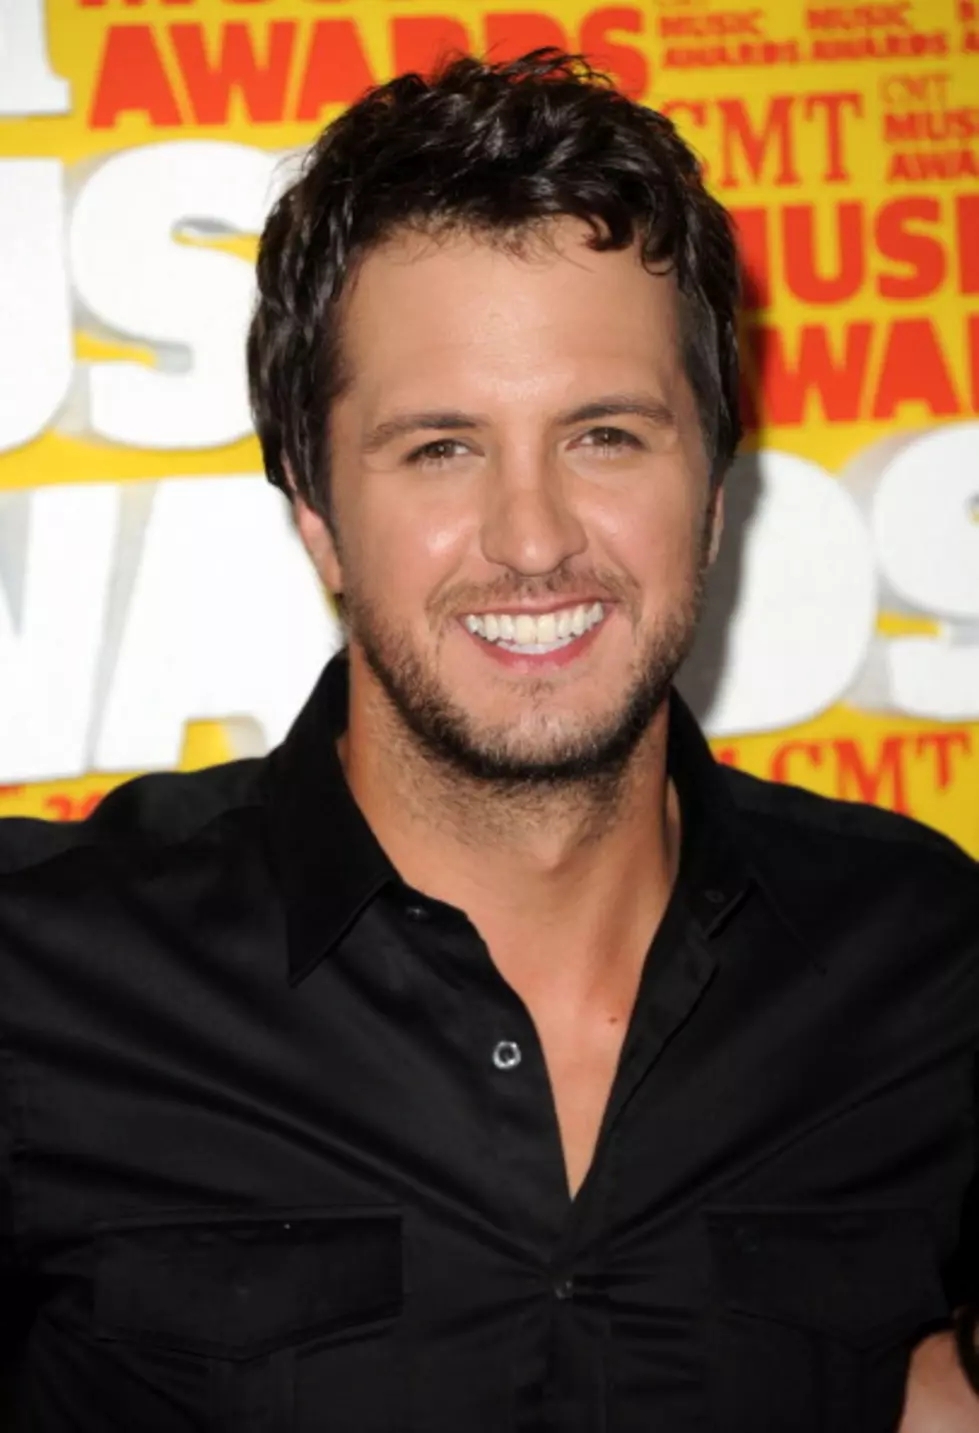 Luke Bryan Featured On Today’s Daily Duel [AUDIO]